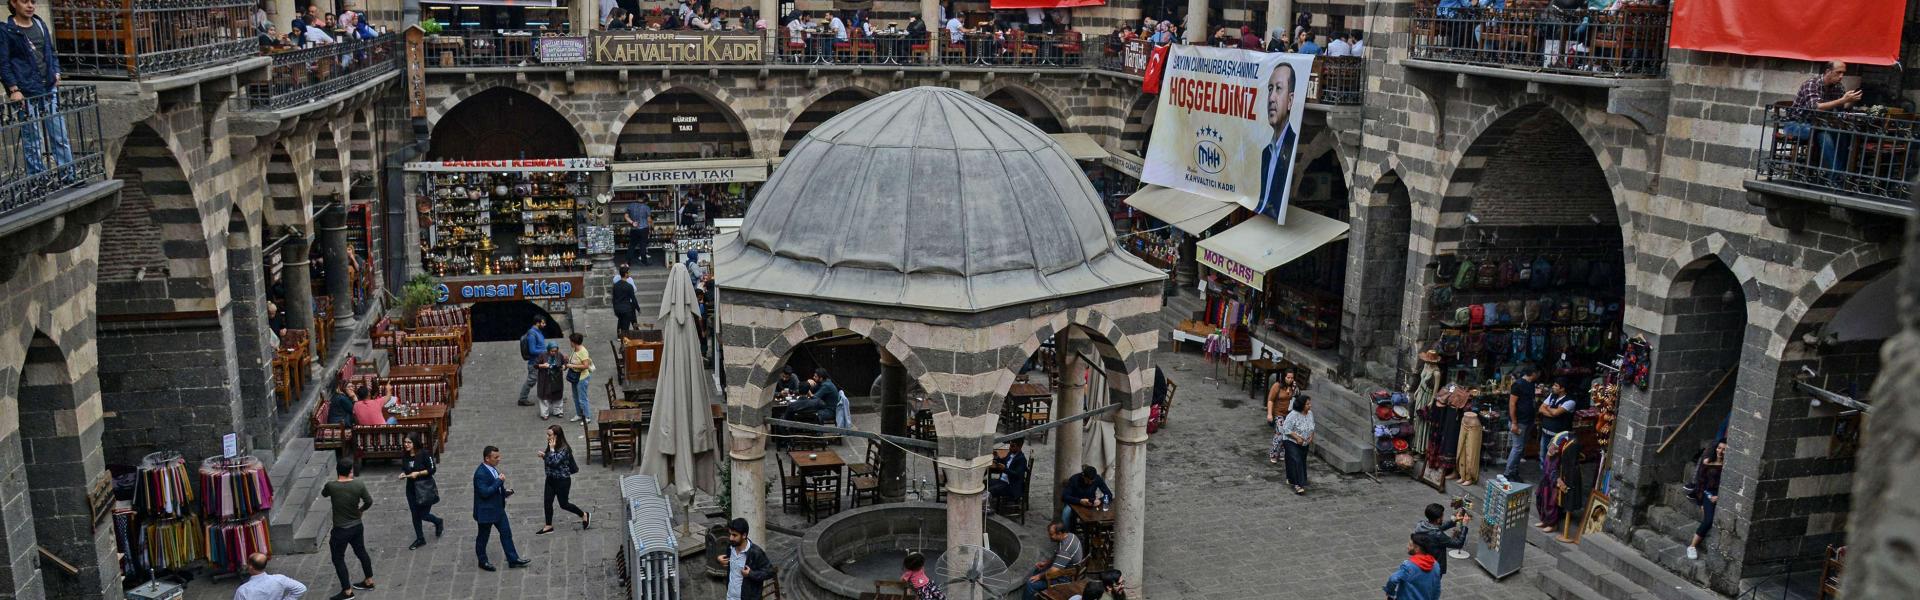 Diyarbakır’s people are tired, but still they resist 1